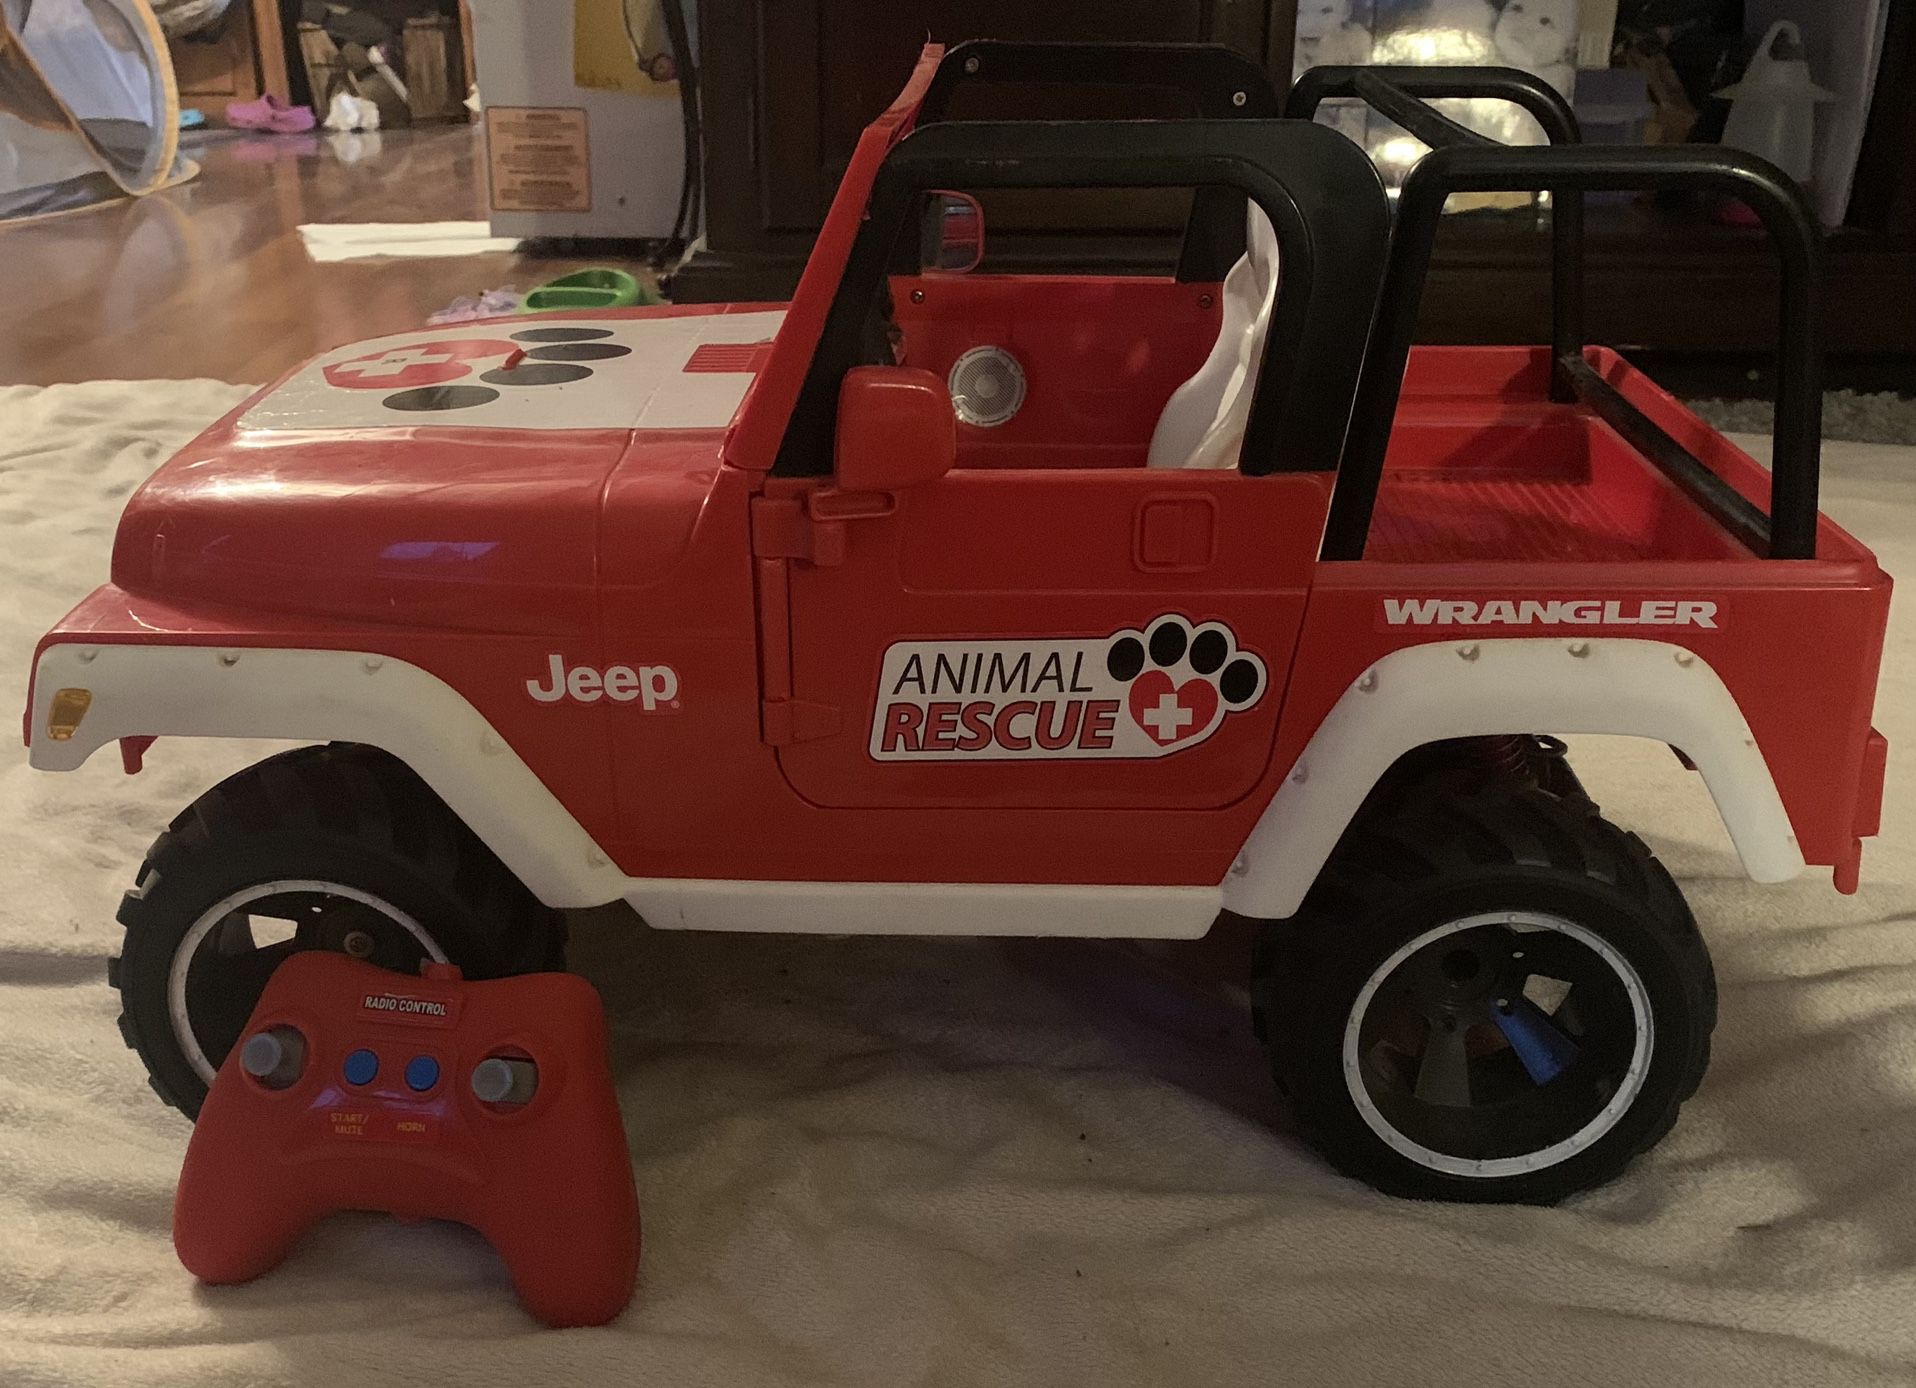 My Life Animal Rescue RC Jeep Wrangler Compatible with American girl dolls